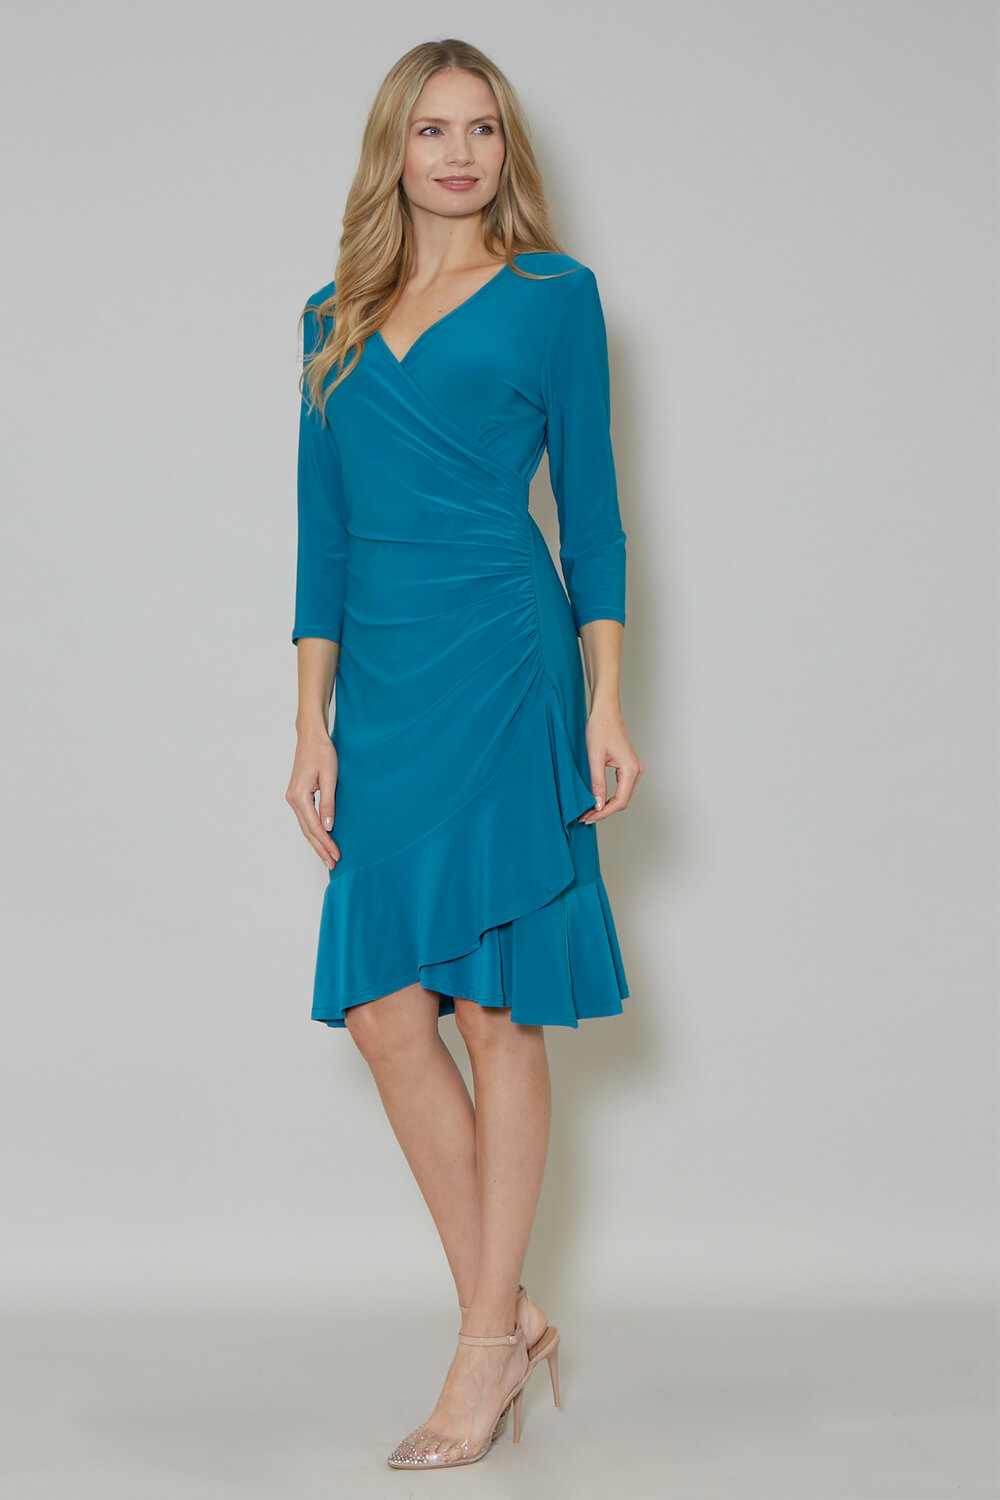 Teal Julianna Ruched Side Wrap Dress, Image 3 of 3